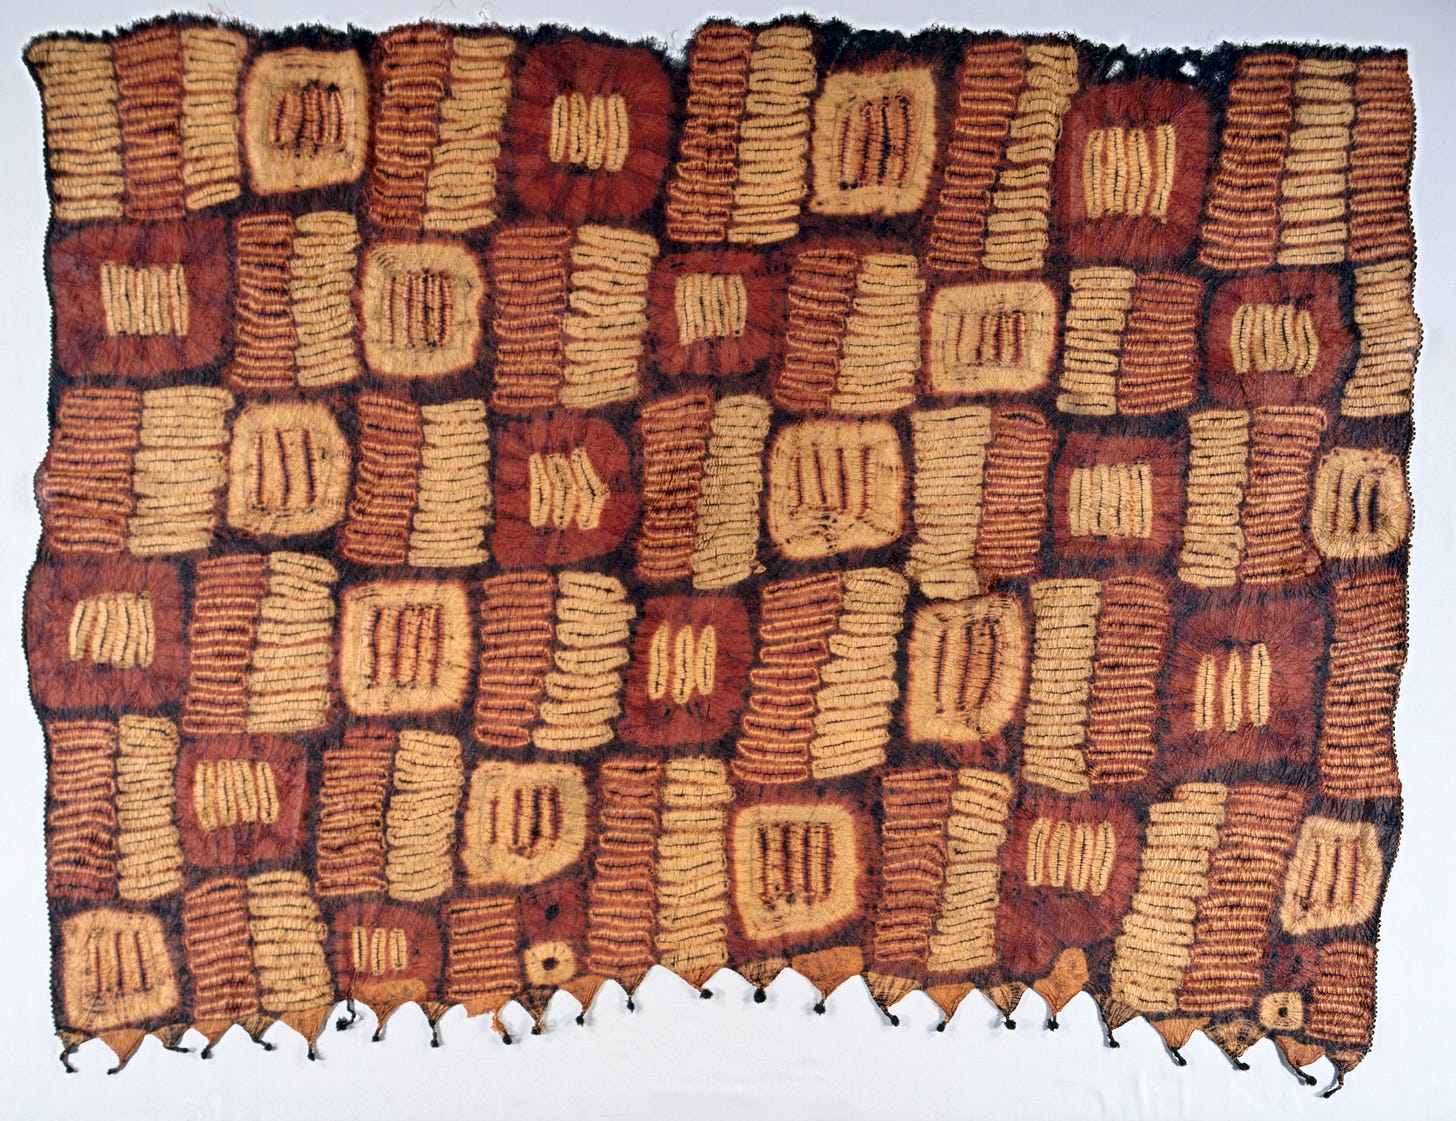 Ivory_Coast,_Dida_people,_possibly_early_20th_century_-_Man's_Garment_-_2003.89_-_Cleveland_Museum_of_Art-2.png